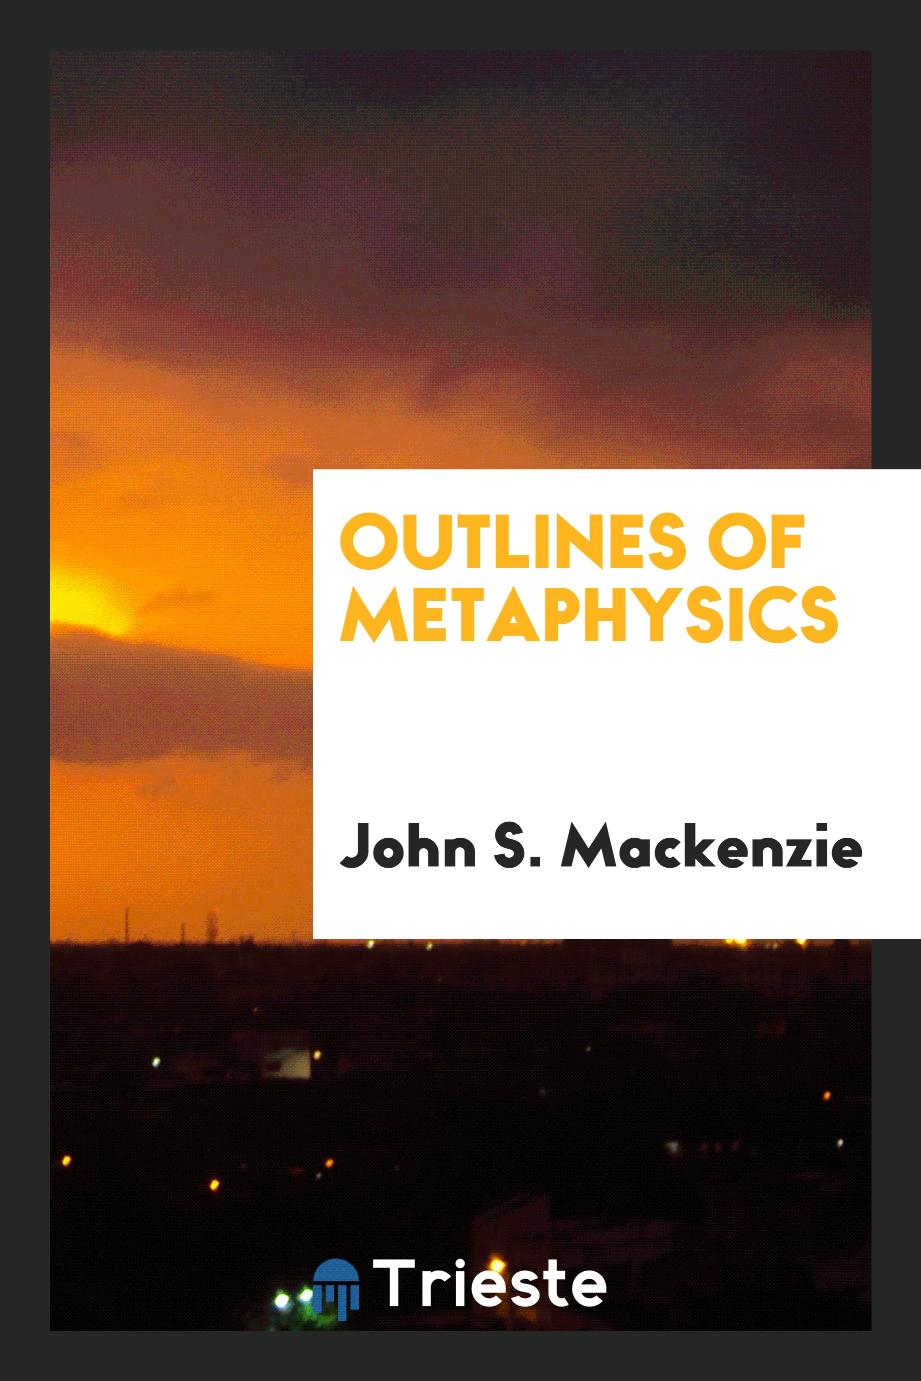 Outlines of metaphysics